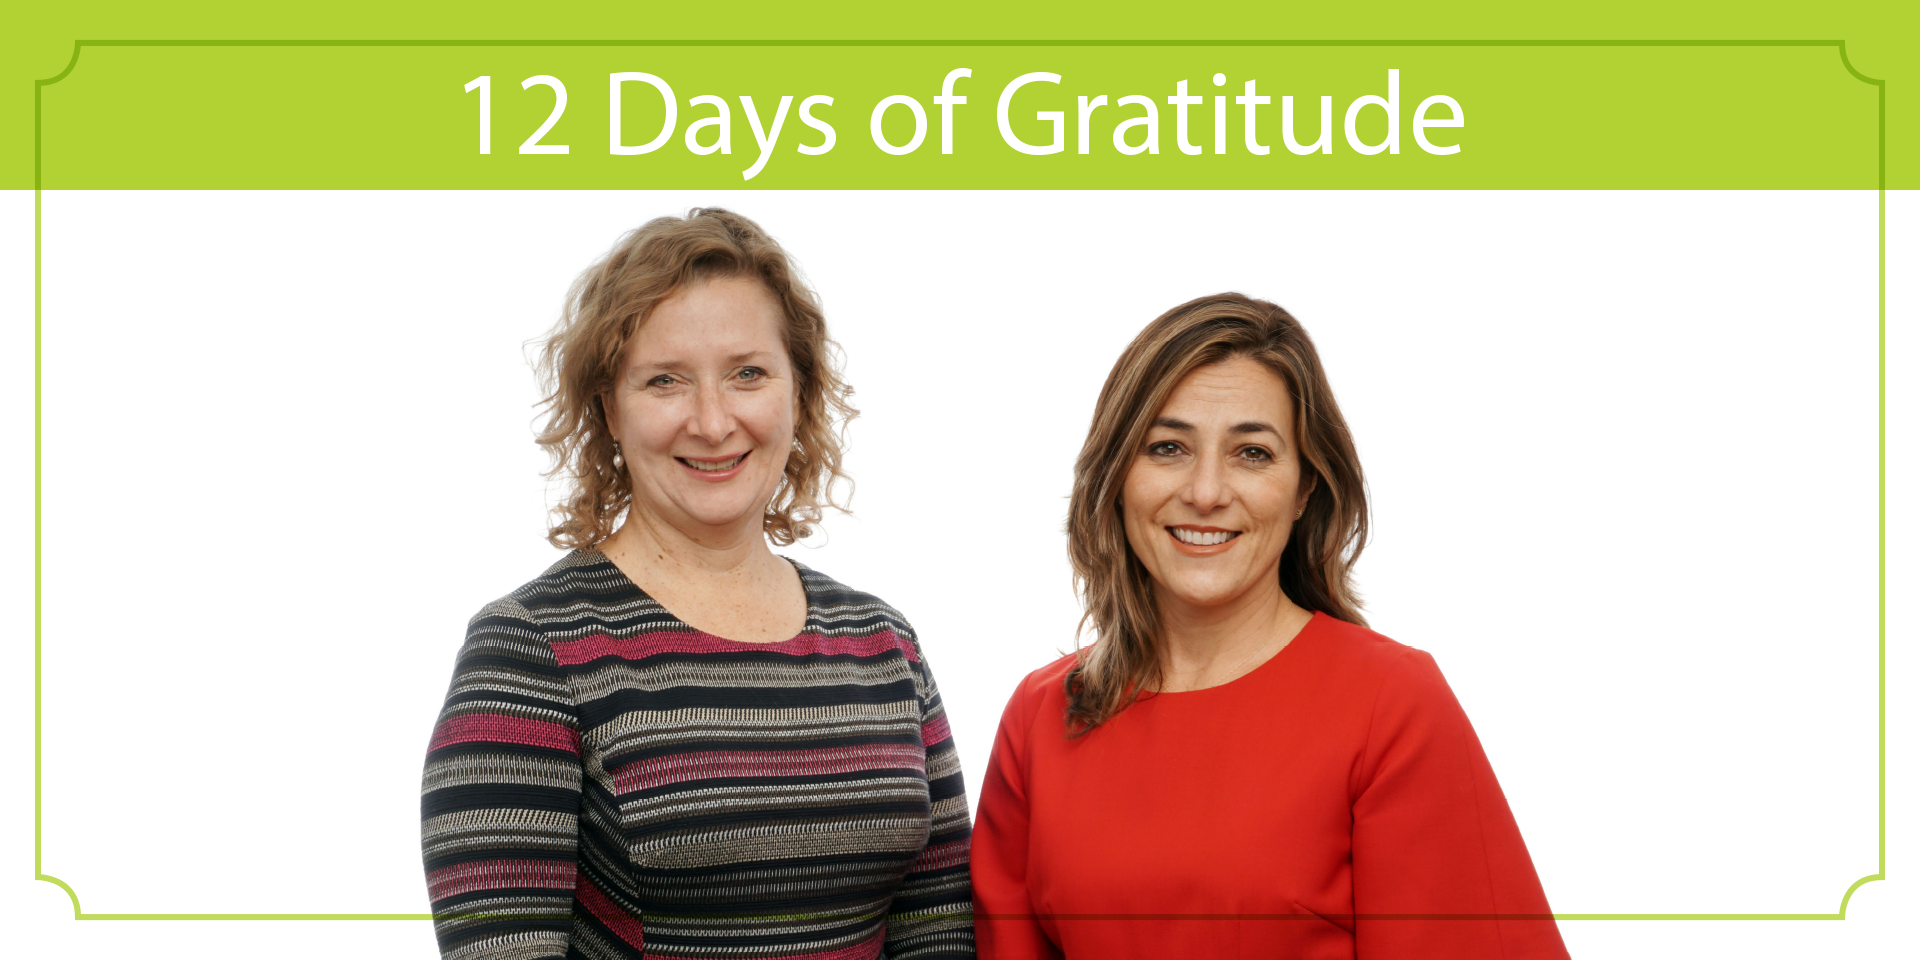 Sarah Downey and Mitze Mourinho on image with 12 days of gratitude banner